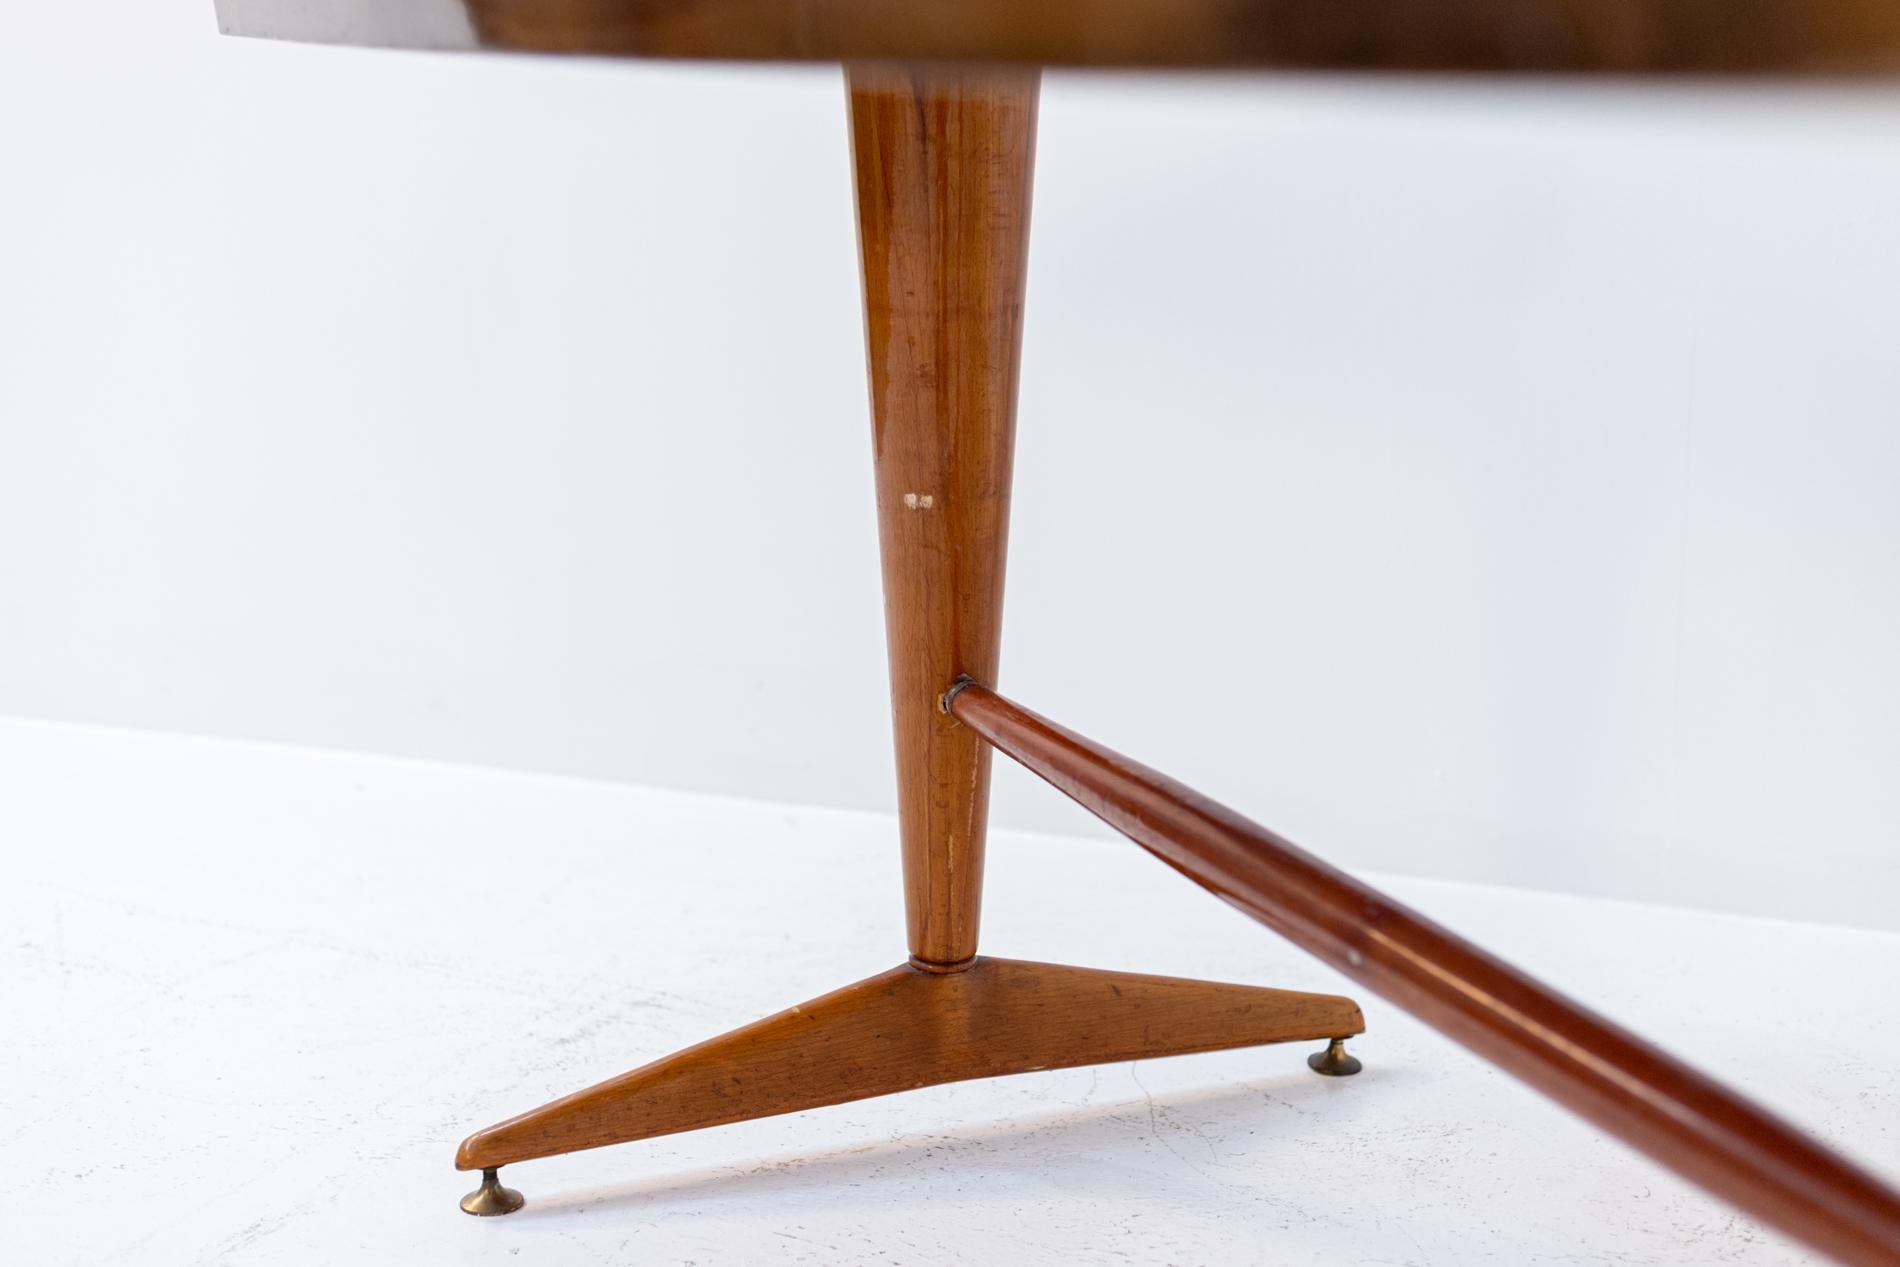 Beautiful Italian wooden table from 1950.
The entire structure of the table was made of fine wood, embedded in the top, a sheet of glass stained light gray, almost making it look like a mirror.
The two legs are conical in shape, joined together